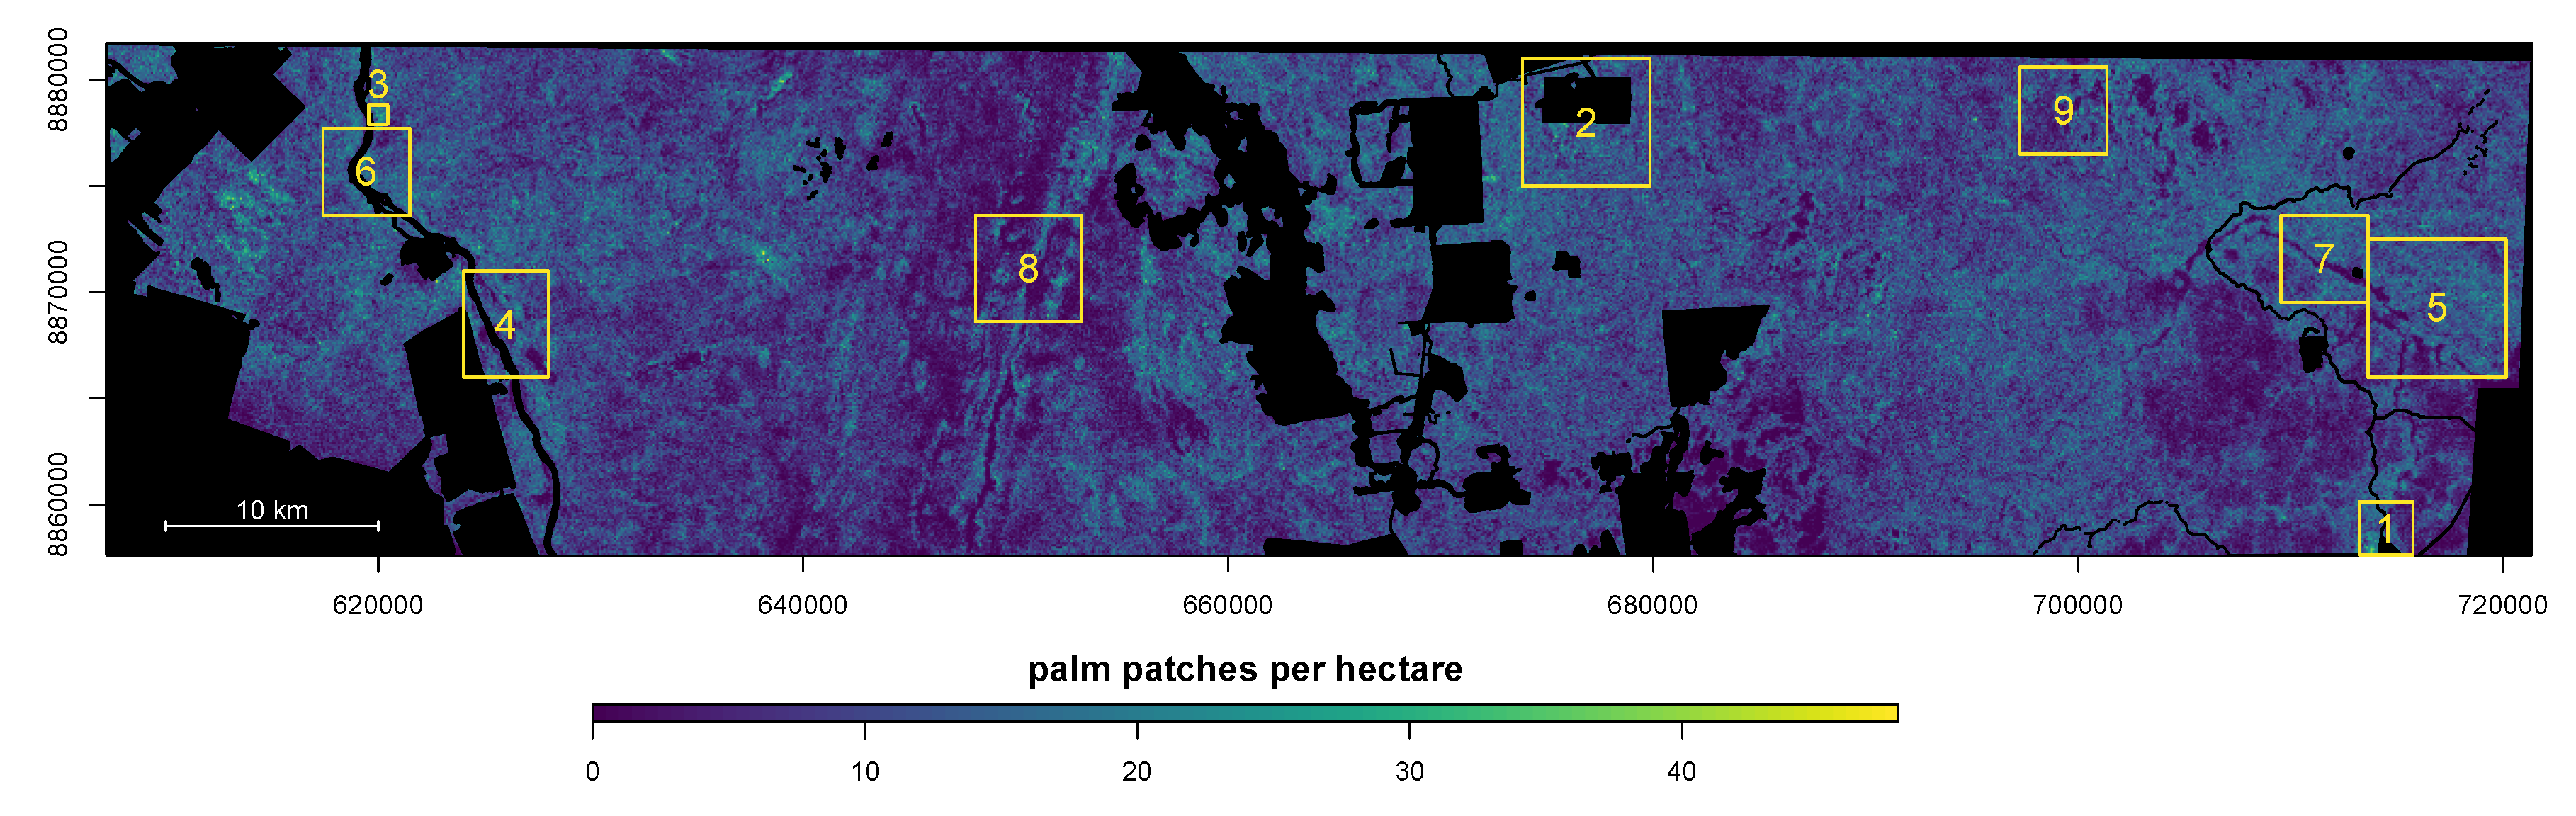 Remote Sensing | Free Full-Text | Regional Mapping and Spatial Distribution  Analysis of Canopy Palms in an Amazon Forest Using Deep Learning and VHR  Images | HTML